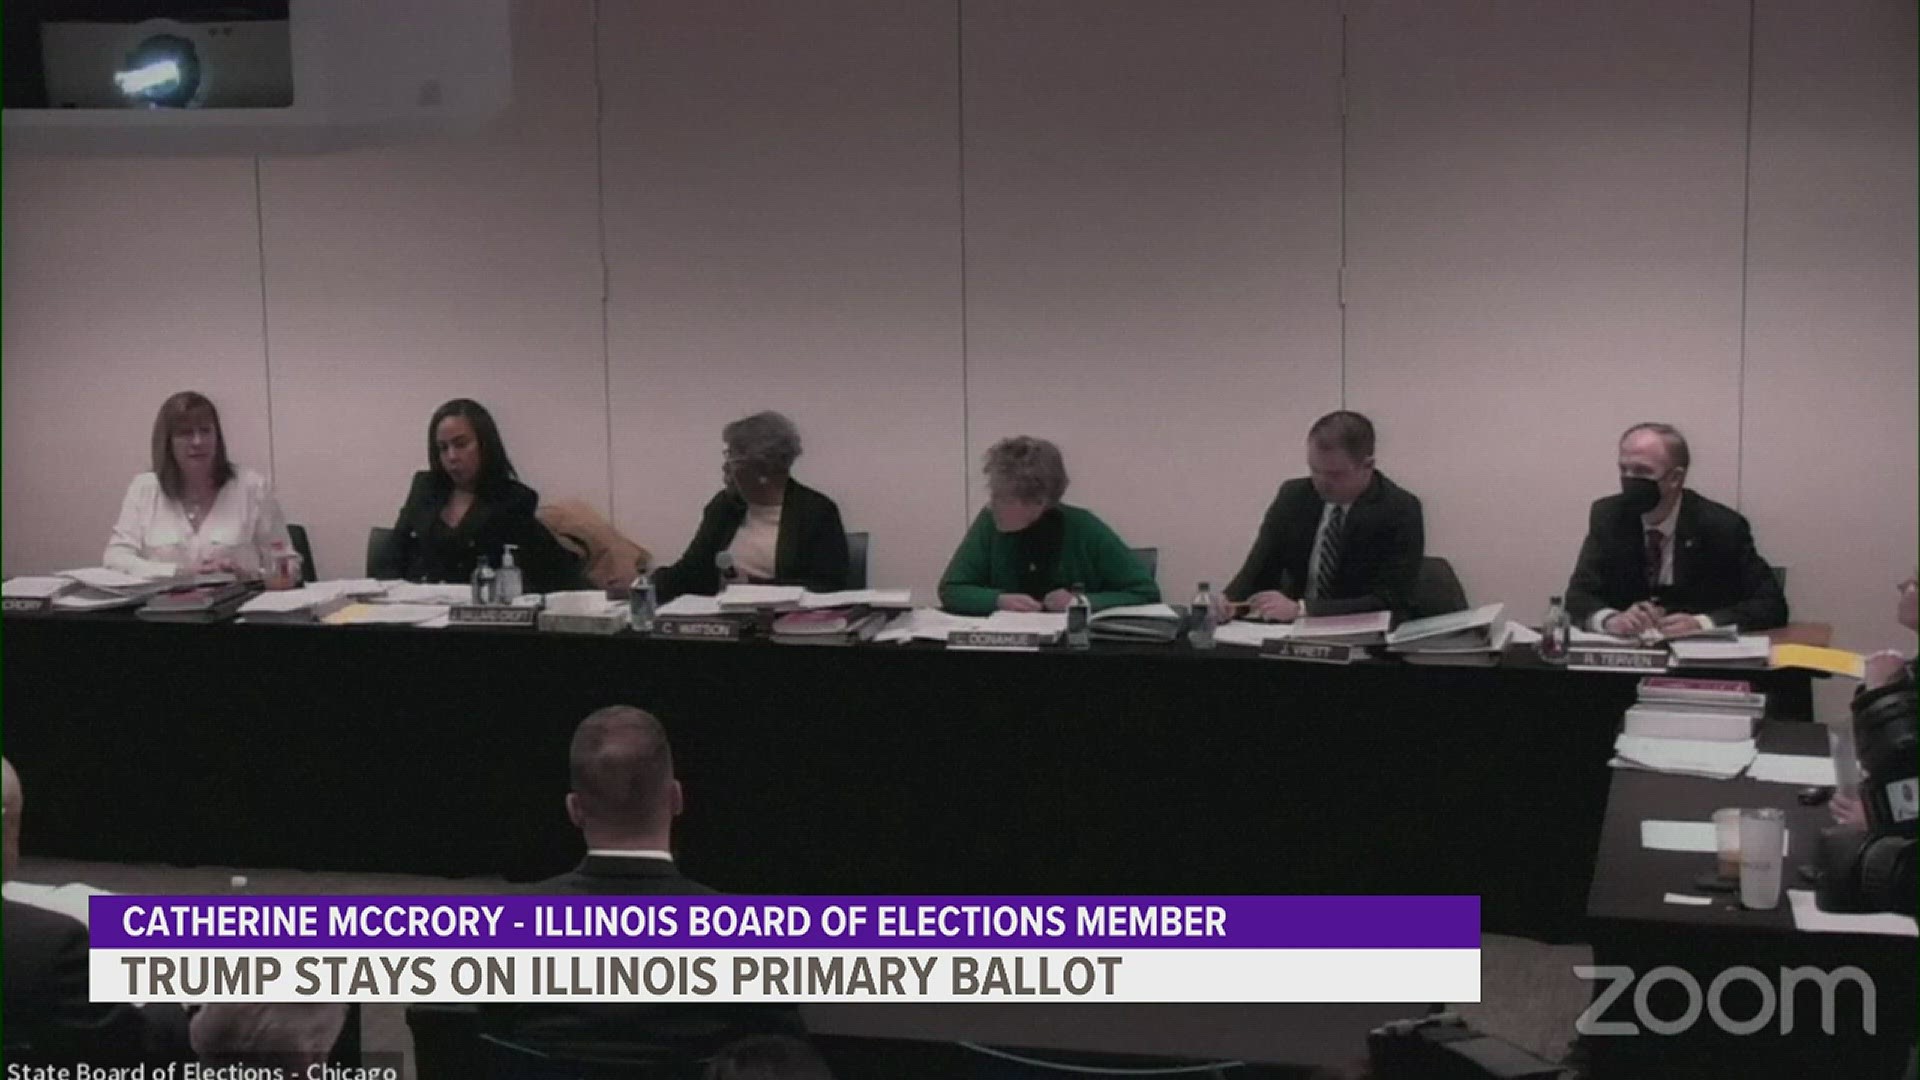 The board members unanimously decided that it's not within their powers to remove the former president from the ballot.